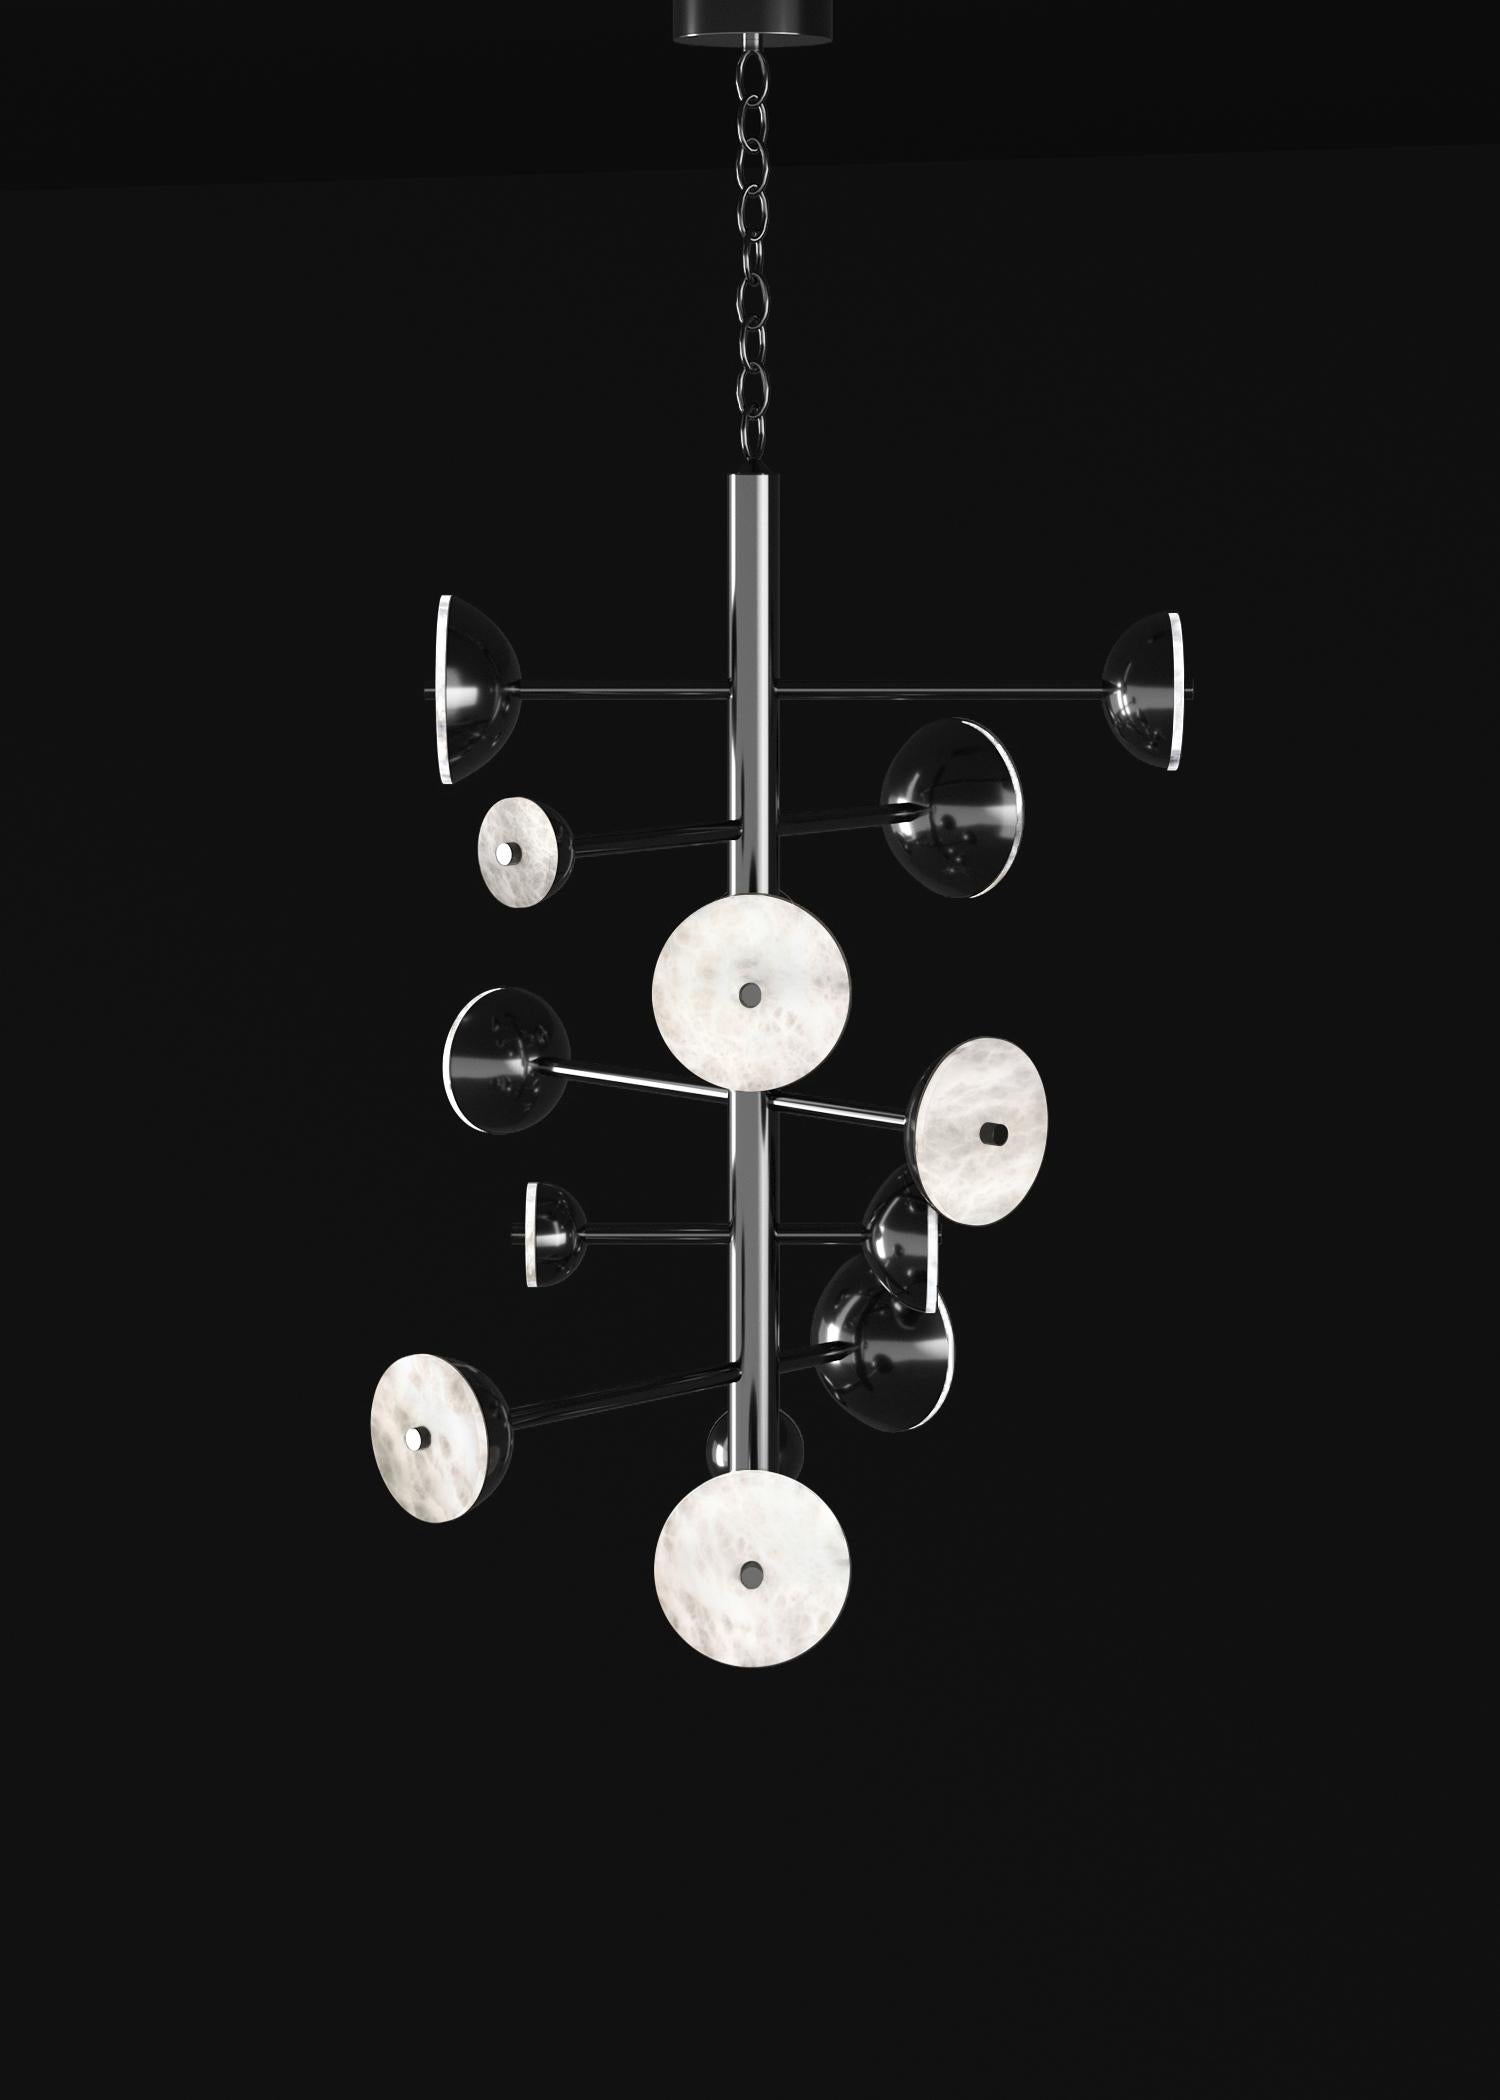 Teti Shiny Black Metal Chandelier by Alabastro Italiano
Dimensions: D 74,5 x W 77,5 x H 110 cm.
Materials: White alabaster and metal.

Available in different finishes: Shiny Silver, Bronze, Brushed Brass, Ruggine of Florence, Brushed Burnished,